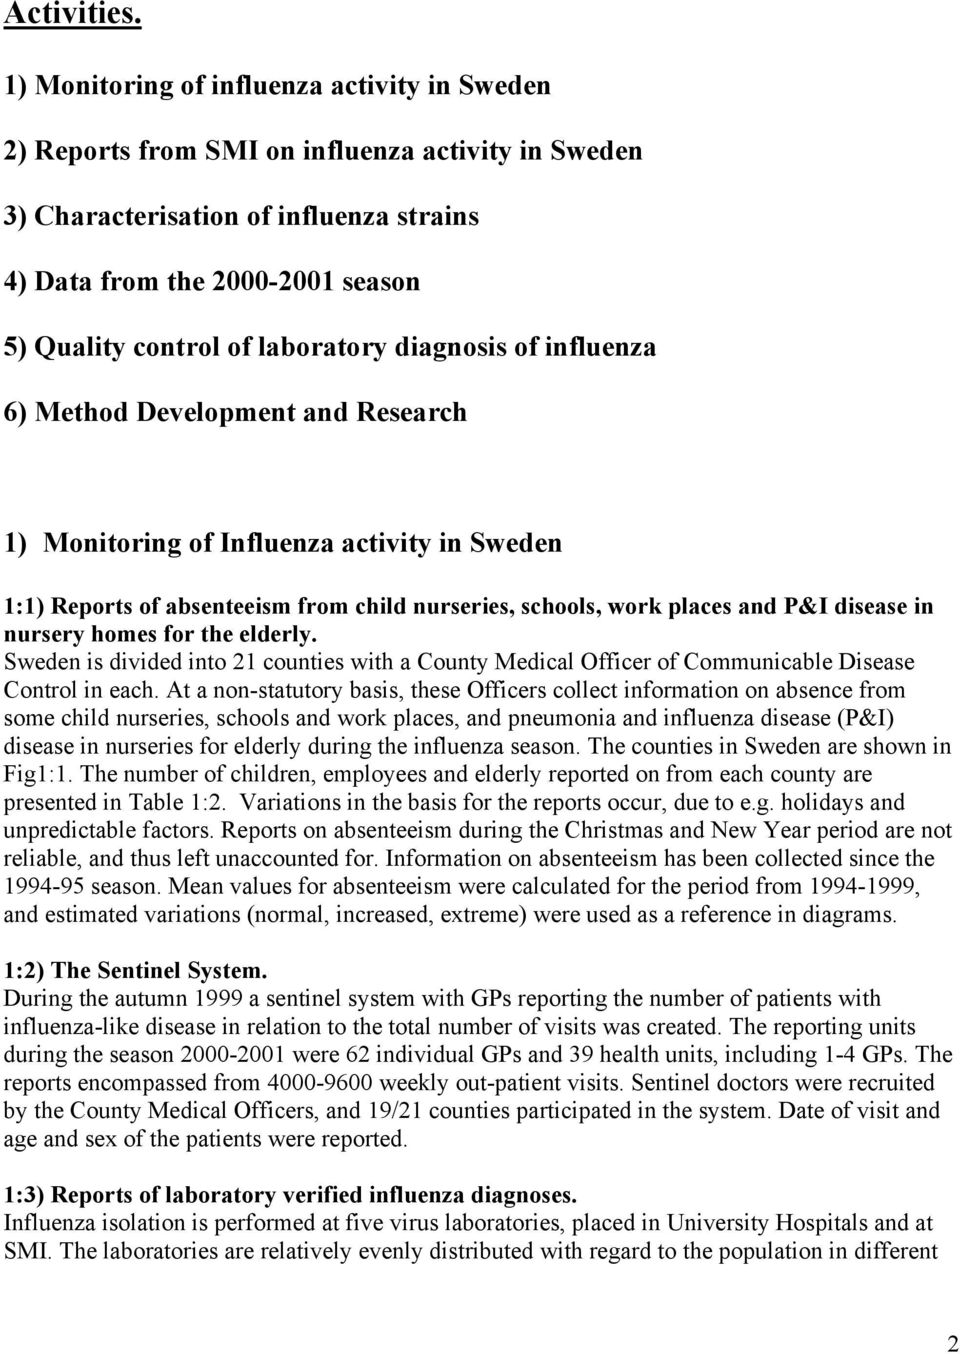 laboratory diagnosis of influenza 6) Method Development and Research 1) Monitoring of Influenza activity in Sweden 1:1) Reports of absenteeism from child nurseries, schools, work places and P&I